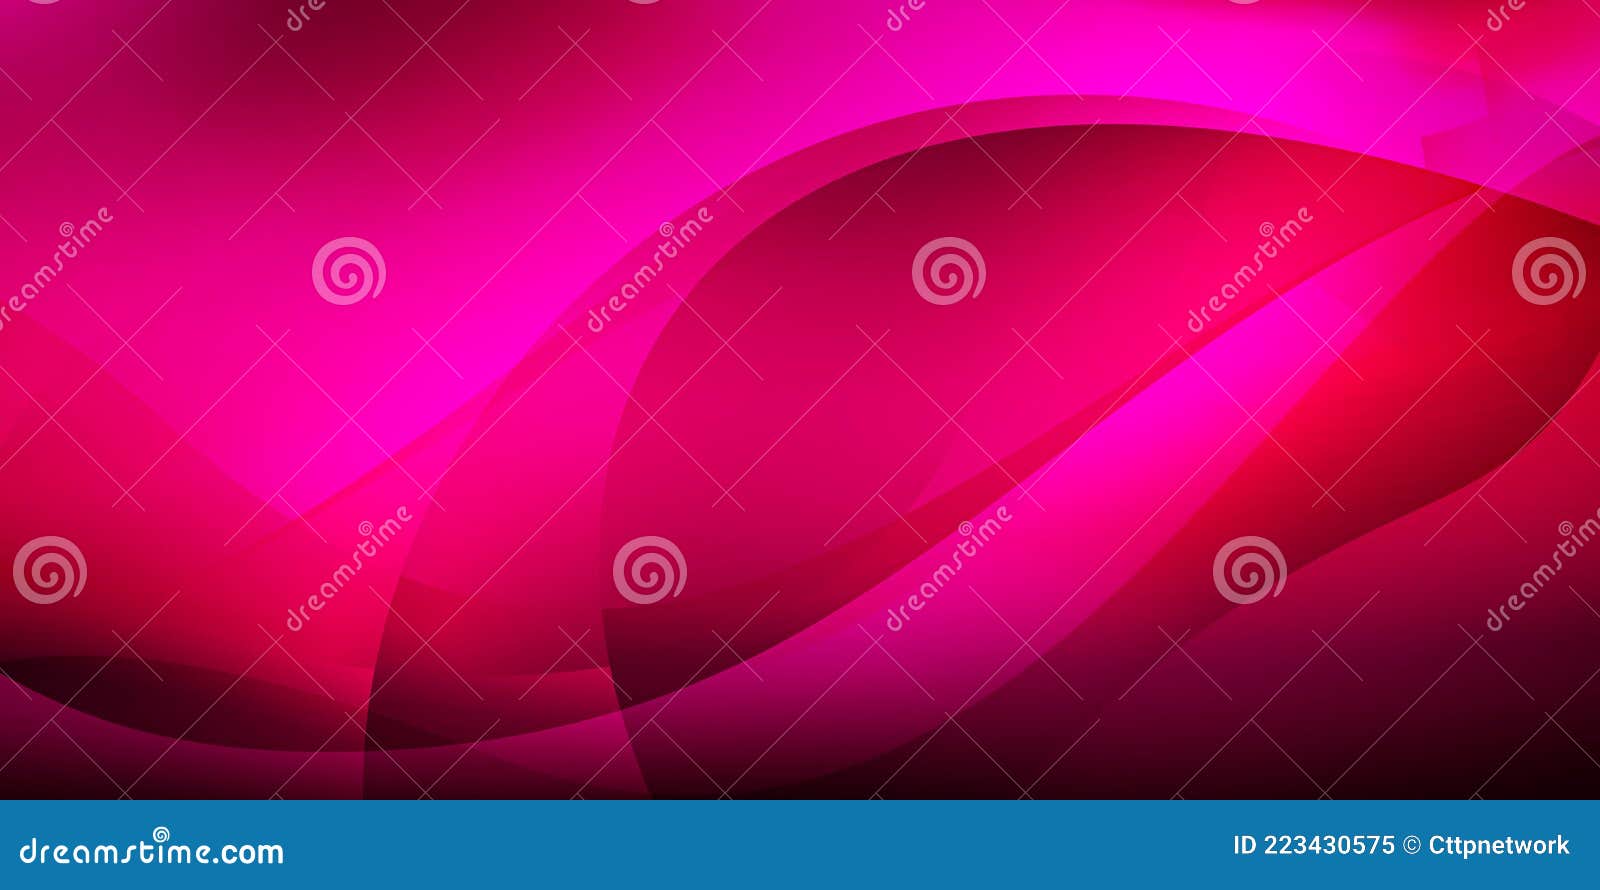 Wallpaper solid color plain pink one colour single dark pink